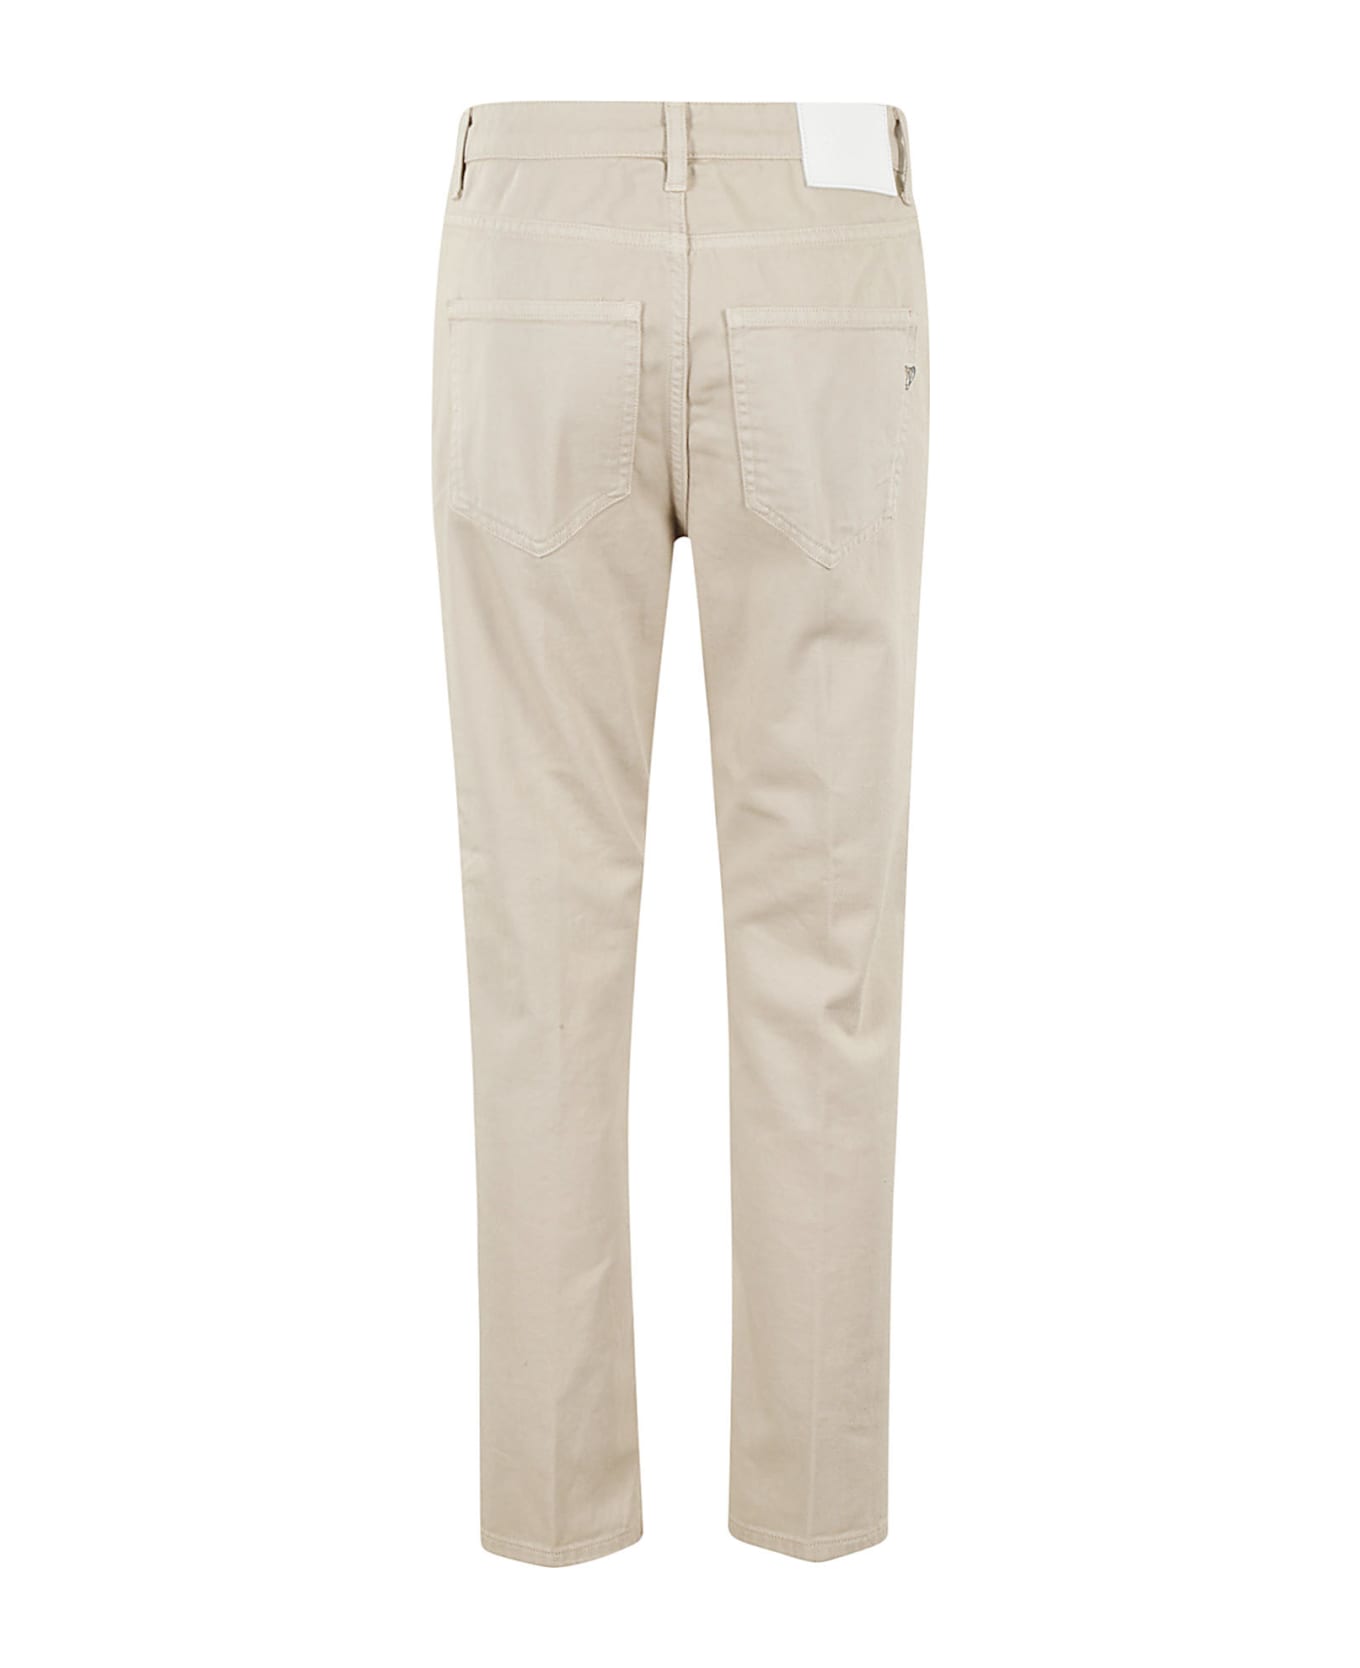 Dondup Pant Cindy - Beige ボトムス